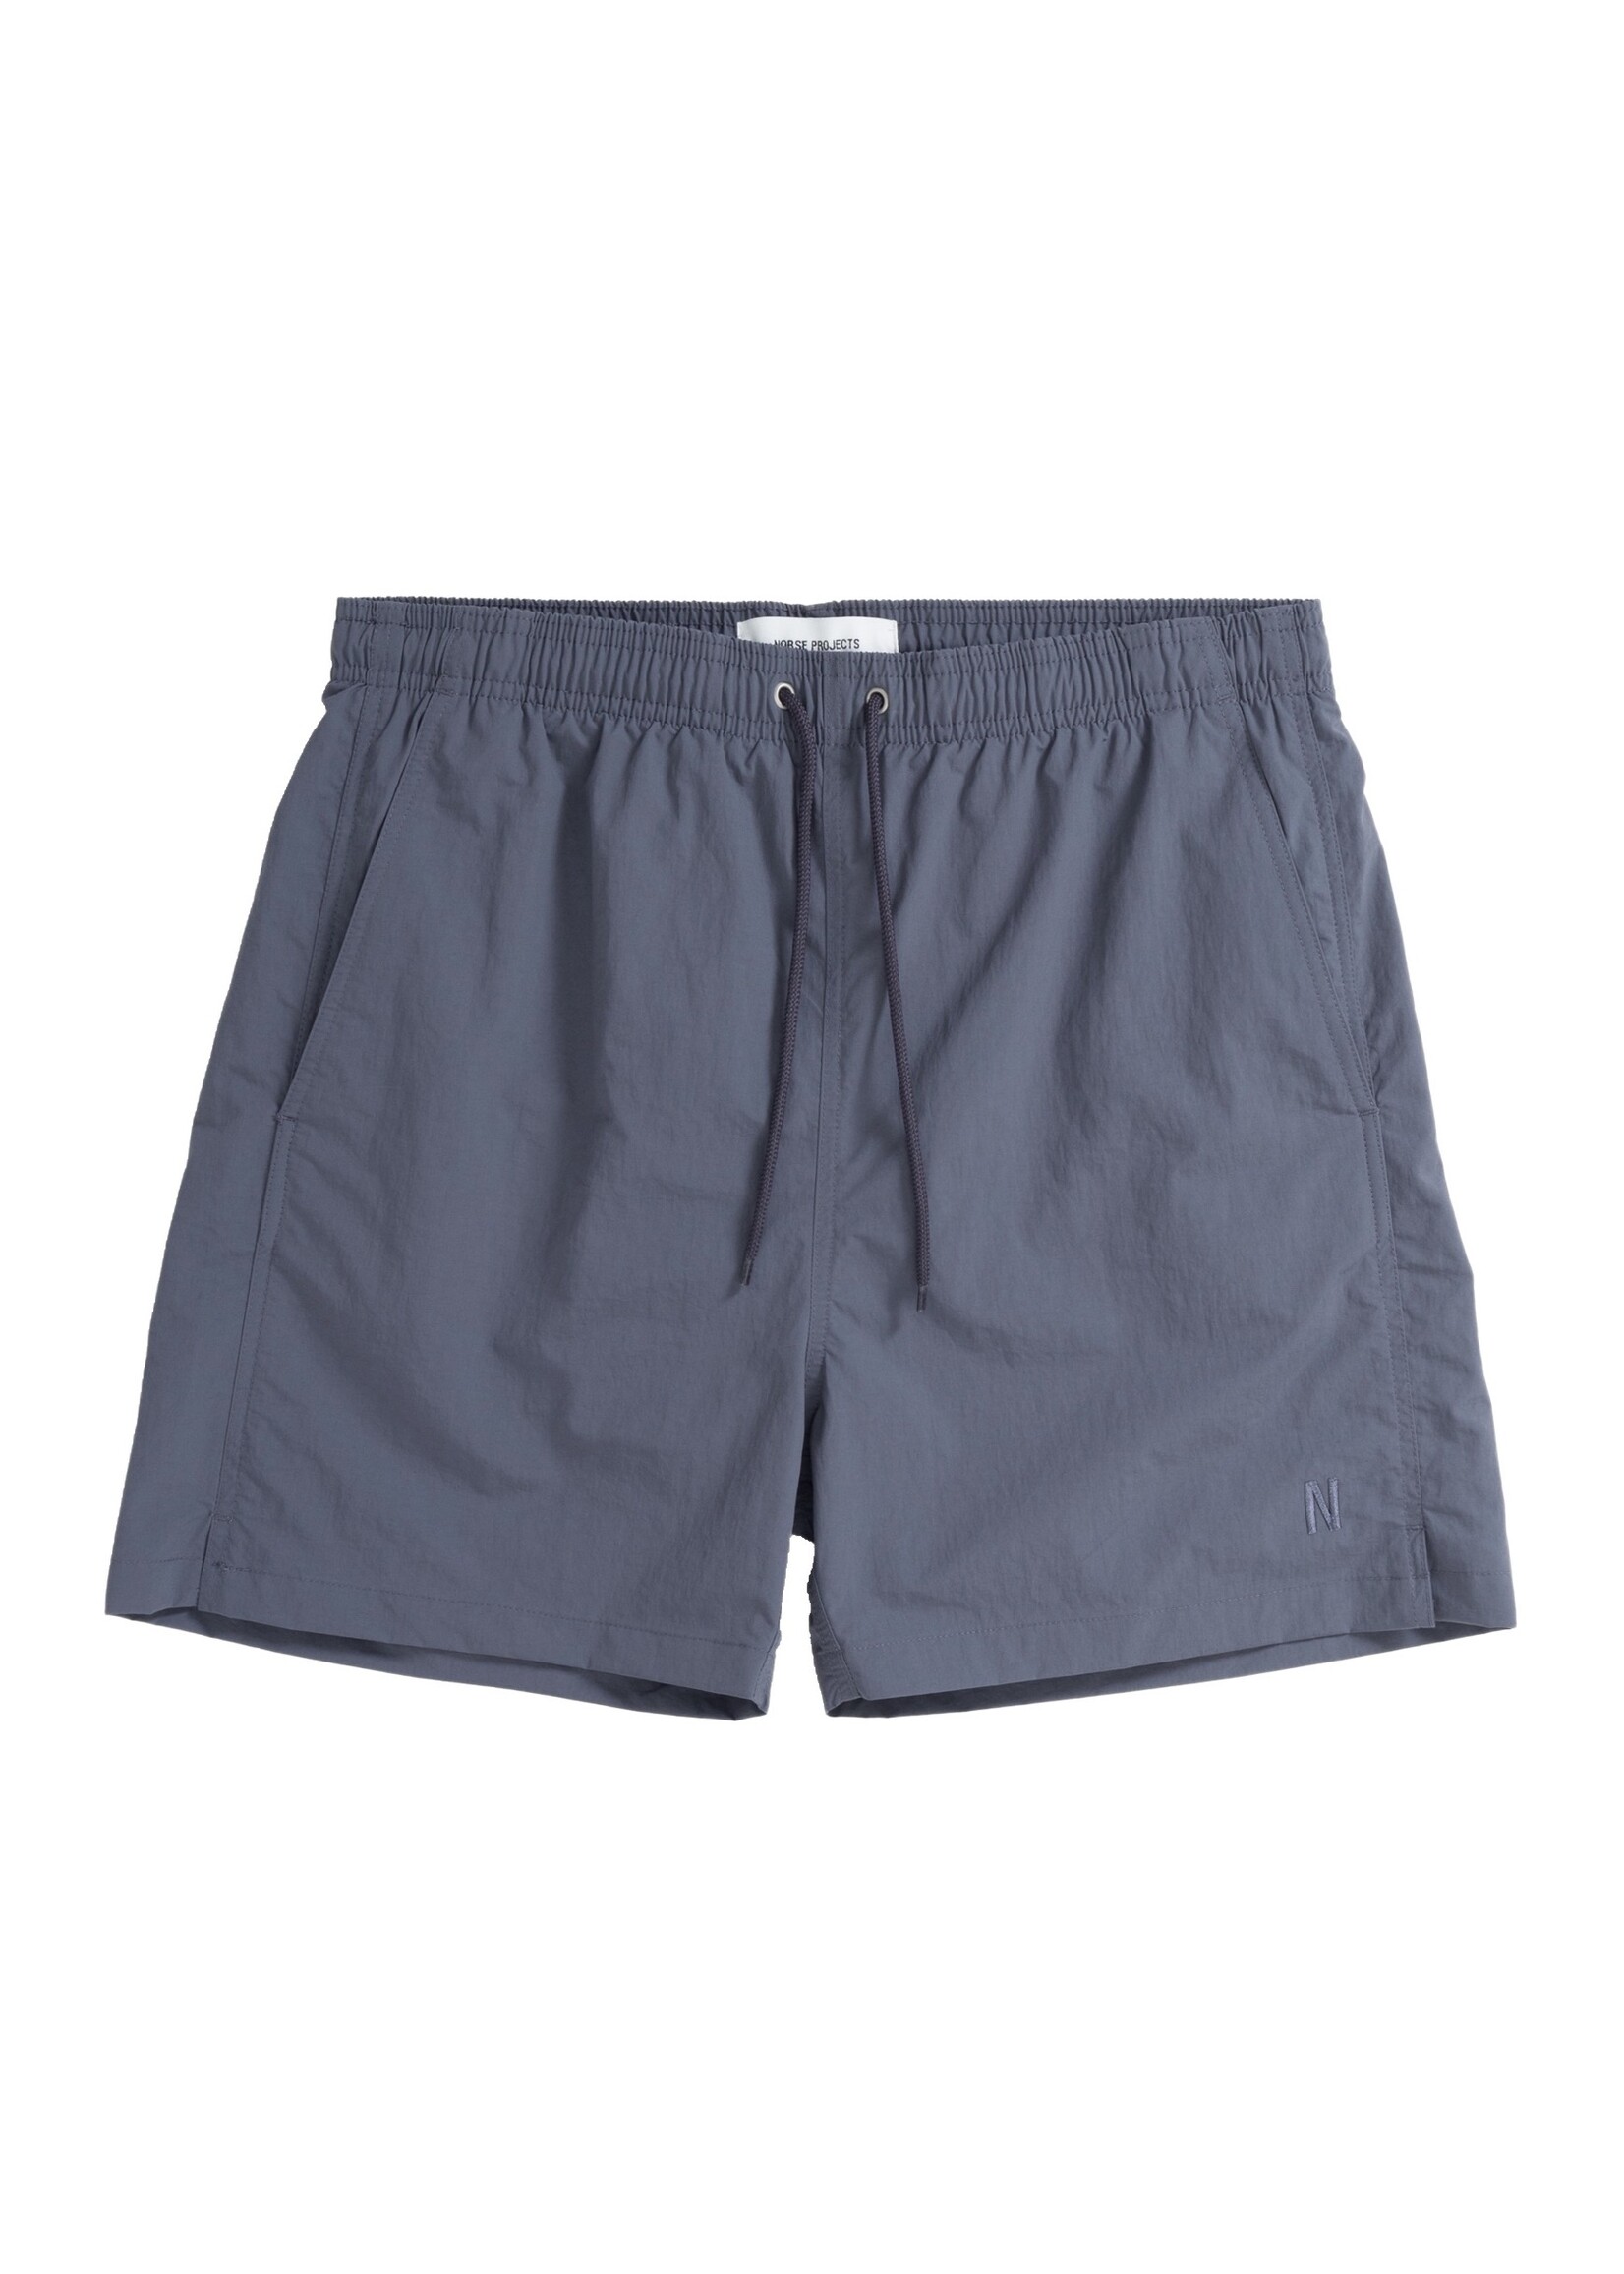 NORSE PROJECTS HAUGE RECYLED NYLON SWIMMER